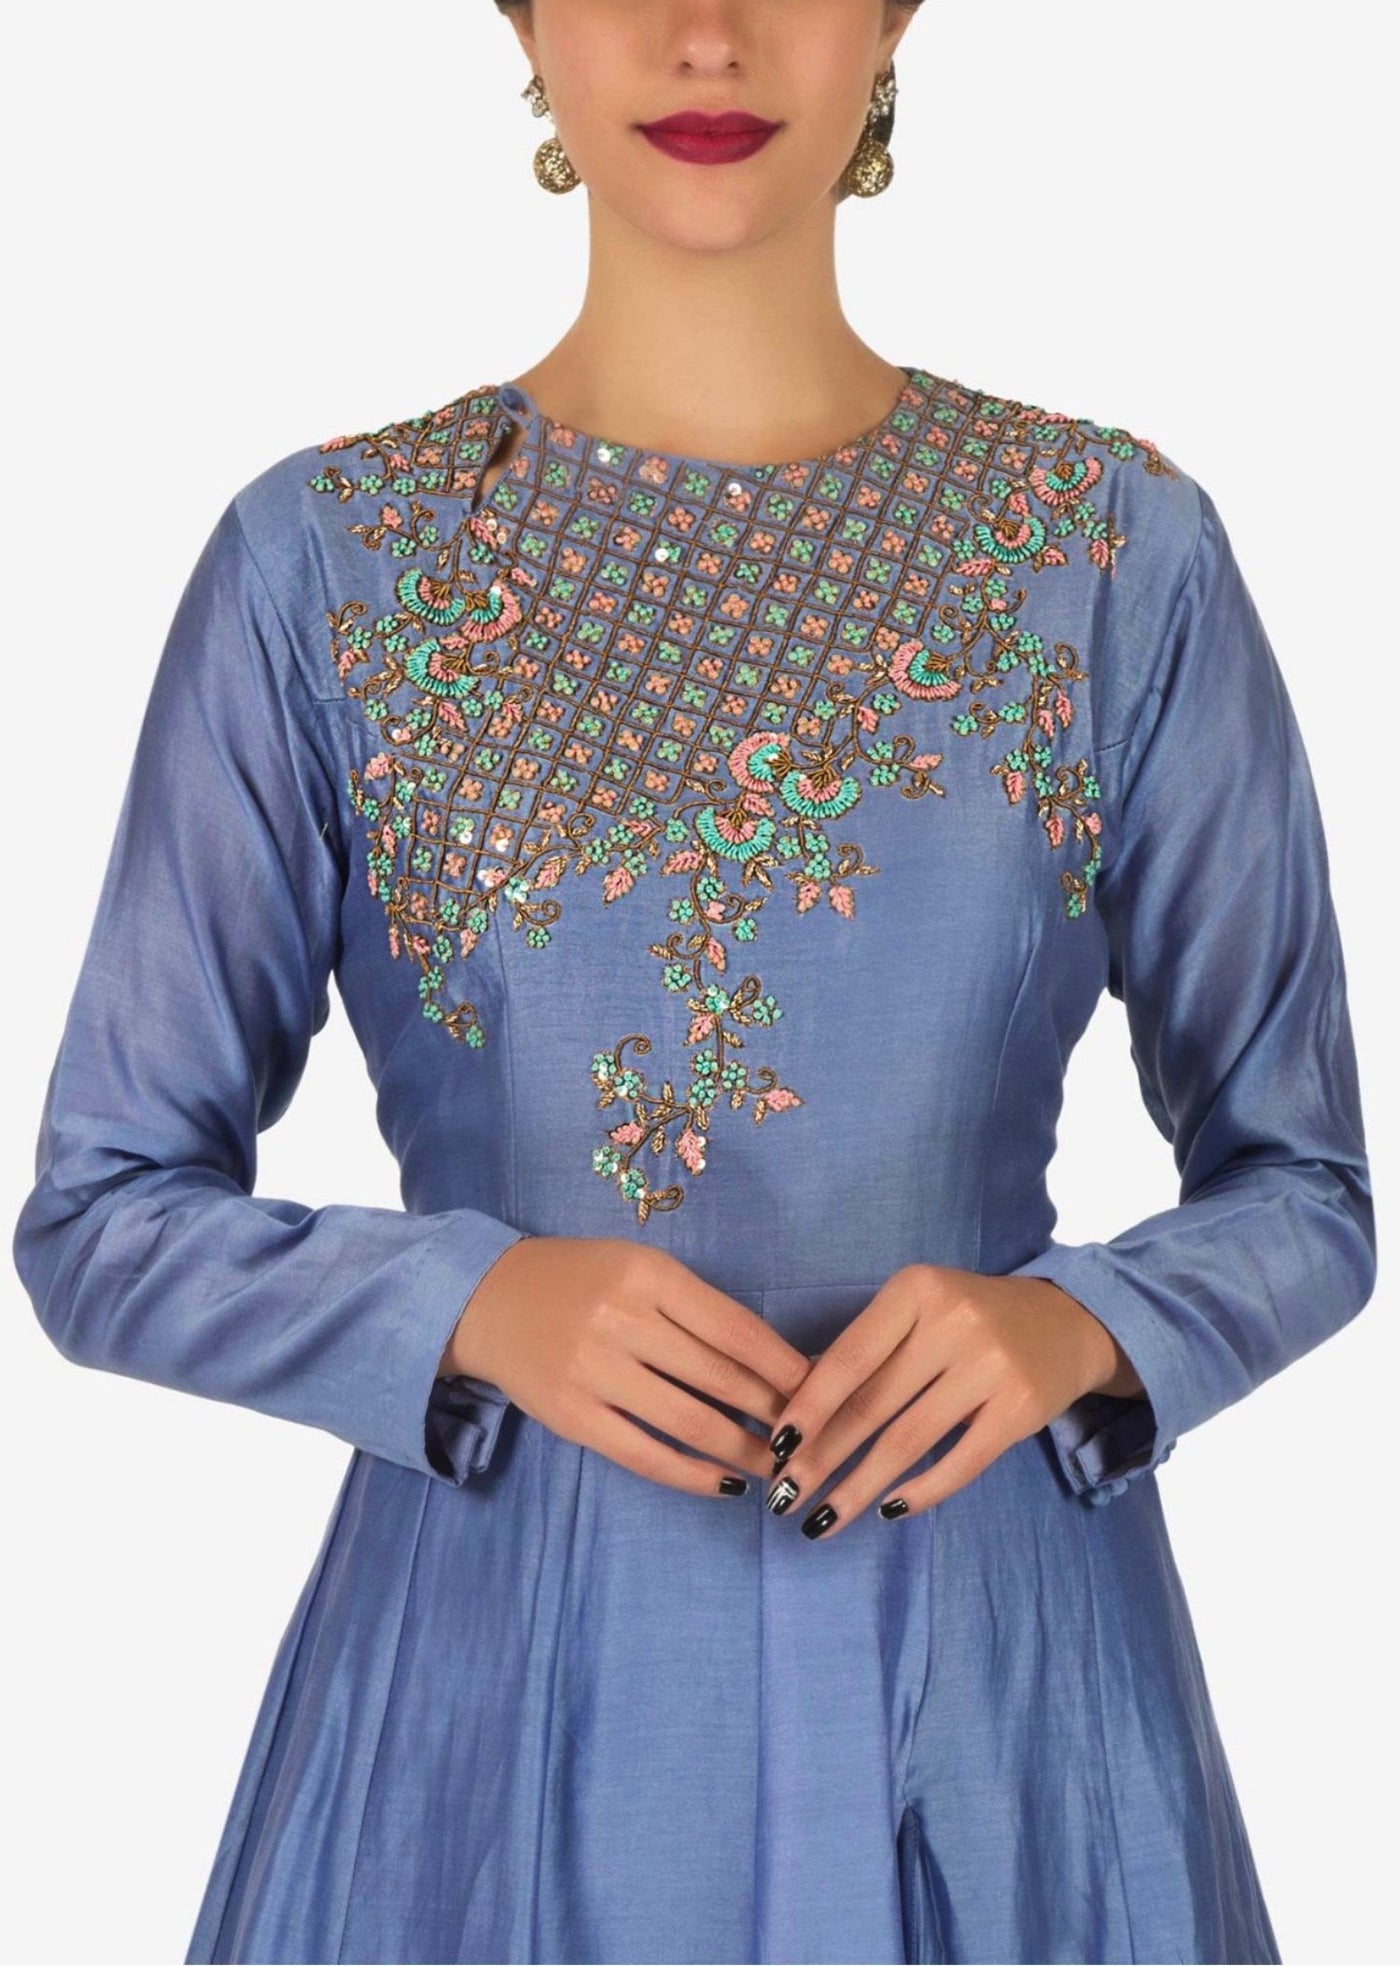 Lavender Anarkali gown - Indian Clothing in Denver, CO, Aurora, CO, Boulder, CO, Fort Collins, CO, Colorado Springs, CO, Parker, CO, Highlands Ranch, CO, Cherry Creek, CO, Centennial, CO, and Longmont, CO. Nationwide shipping USA - India Fashion X